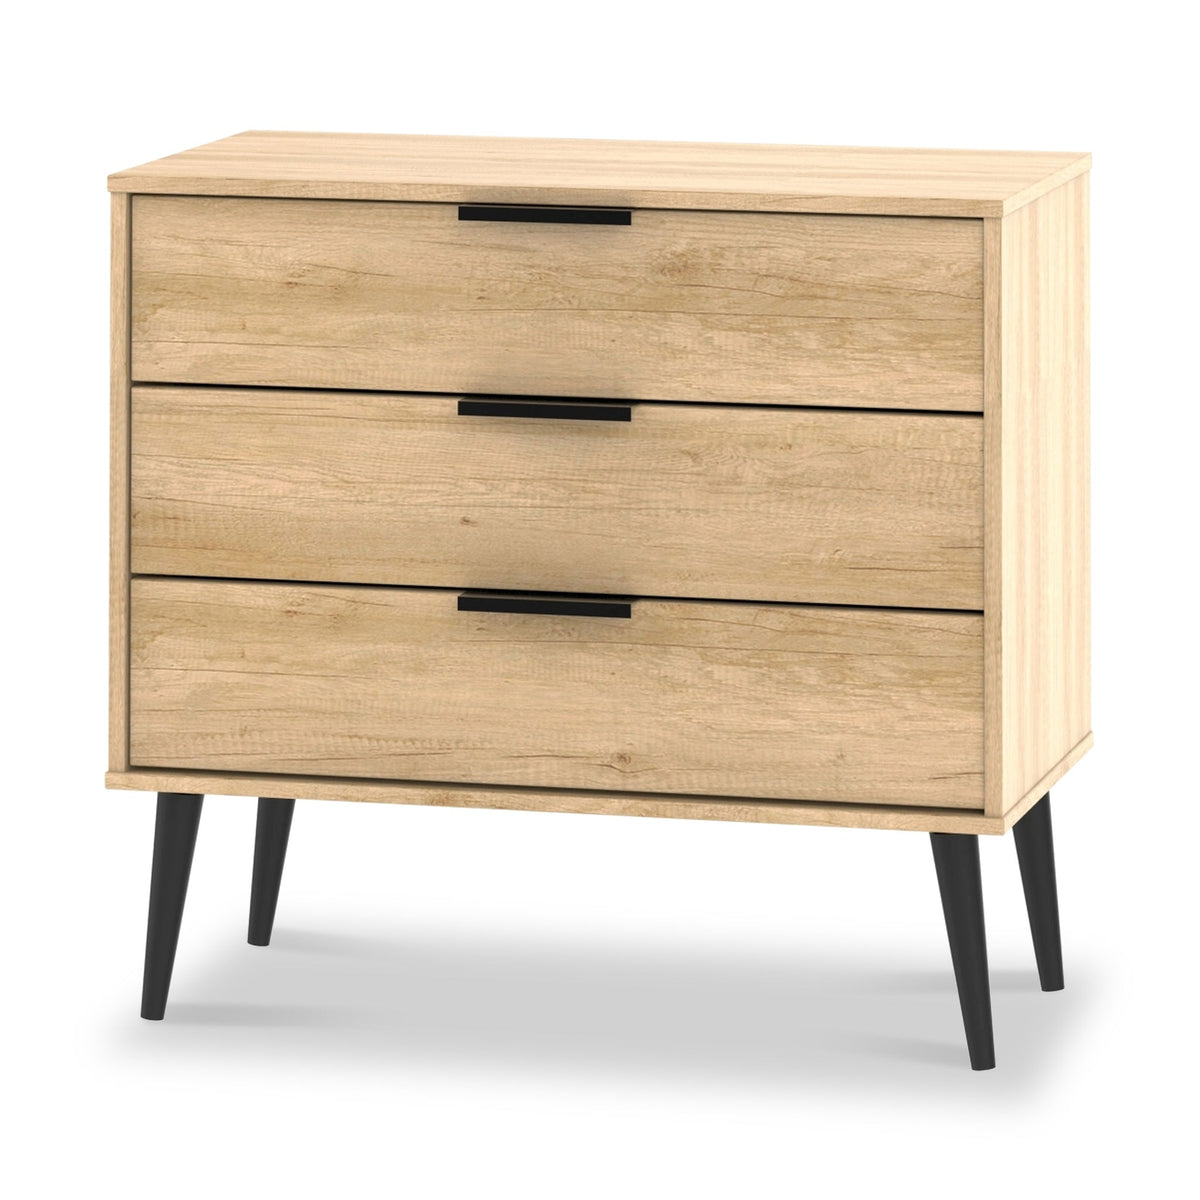 Asher Light Oak 3 Drawer Chest with black legs from Roseland furniture